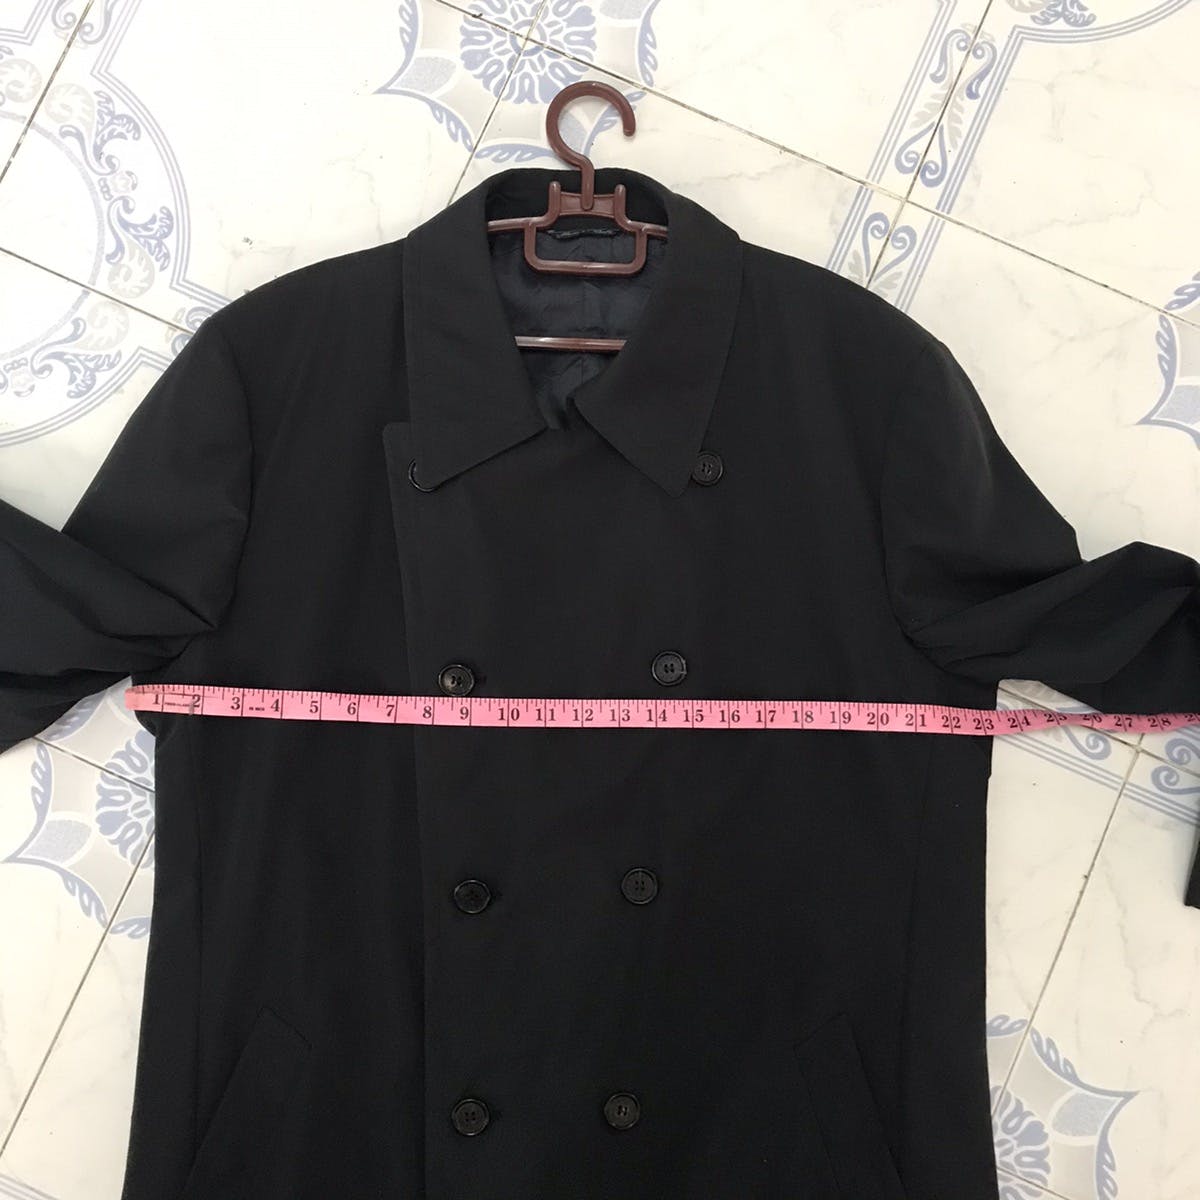 Gucci Long Coat/Jacket Made in Italy - 21